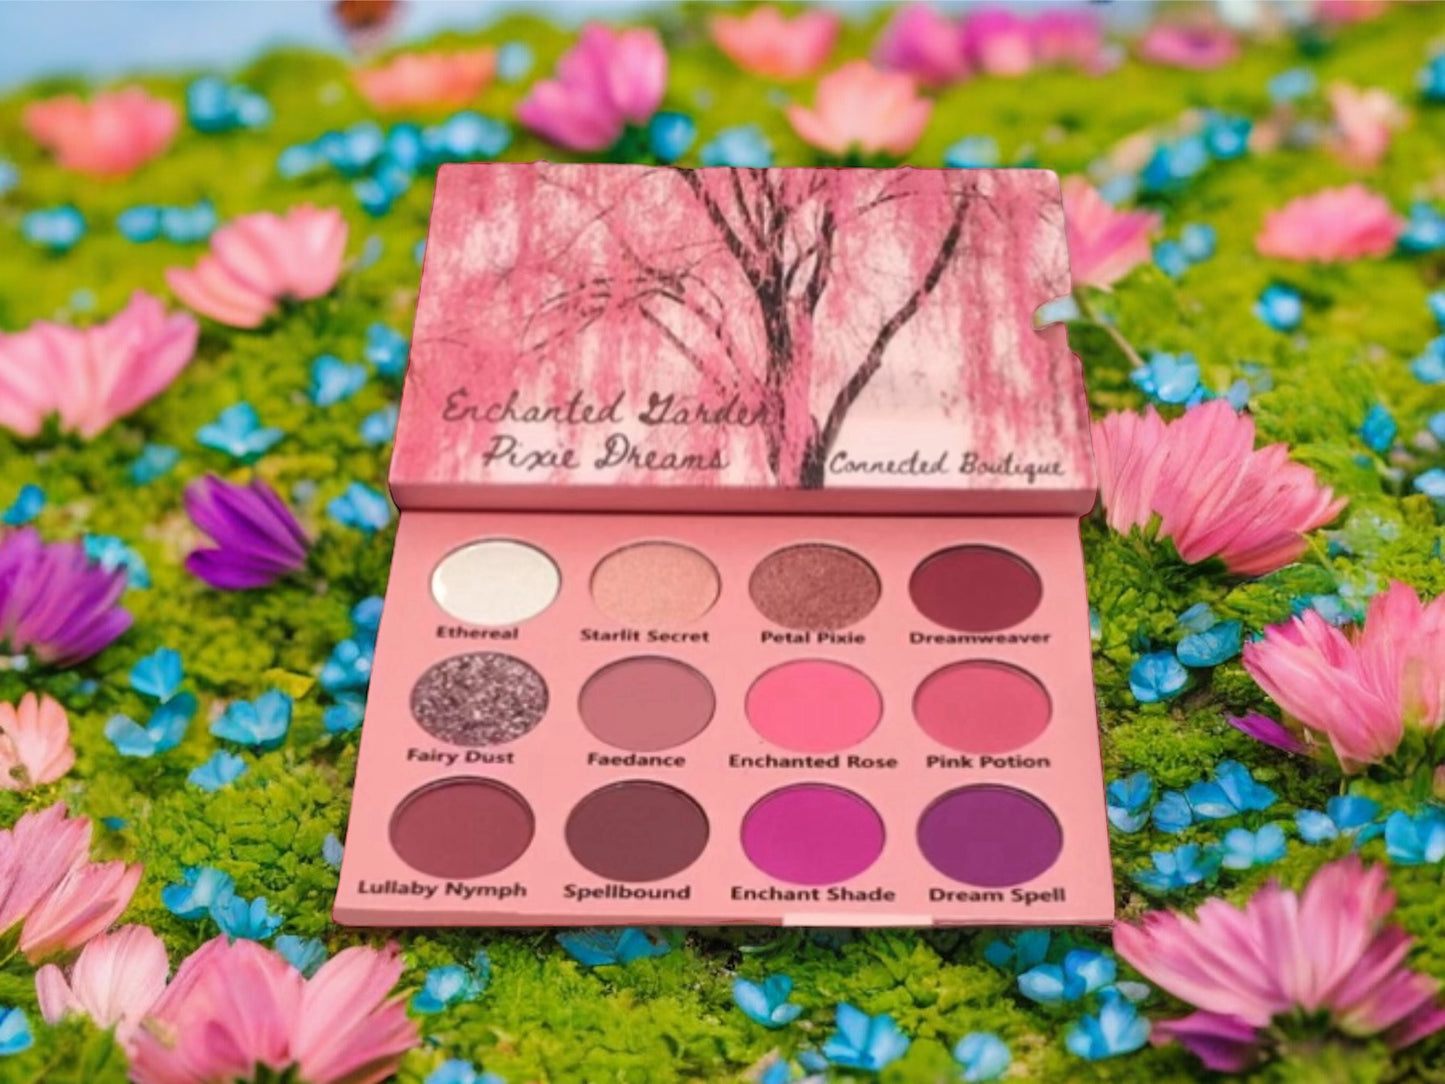 “Enchanted Garden; Pixie Dreams” 12 shade eyeshadow palette pink/purple color story